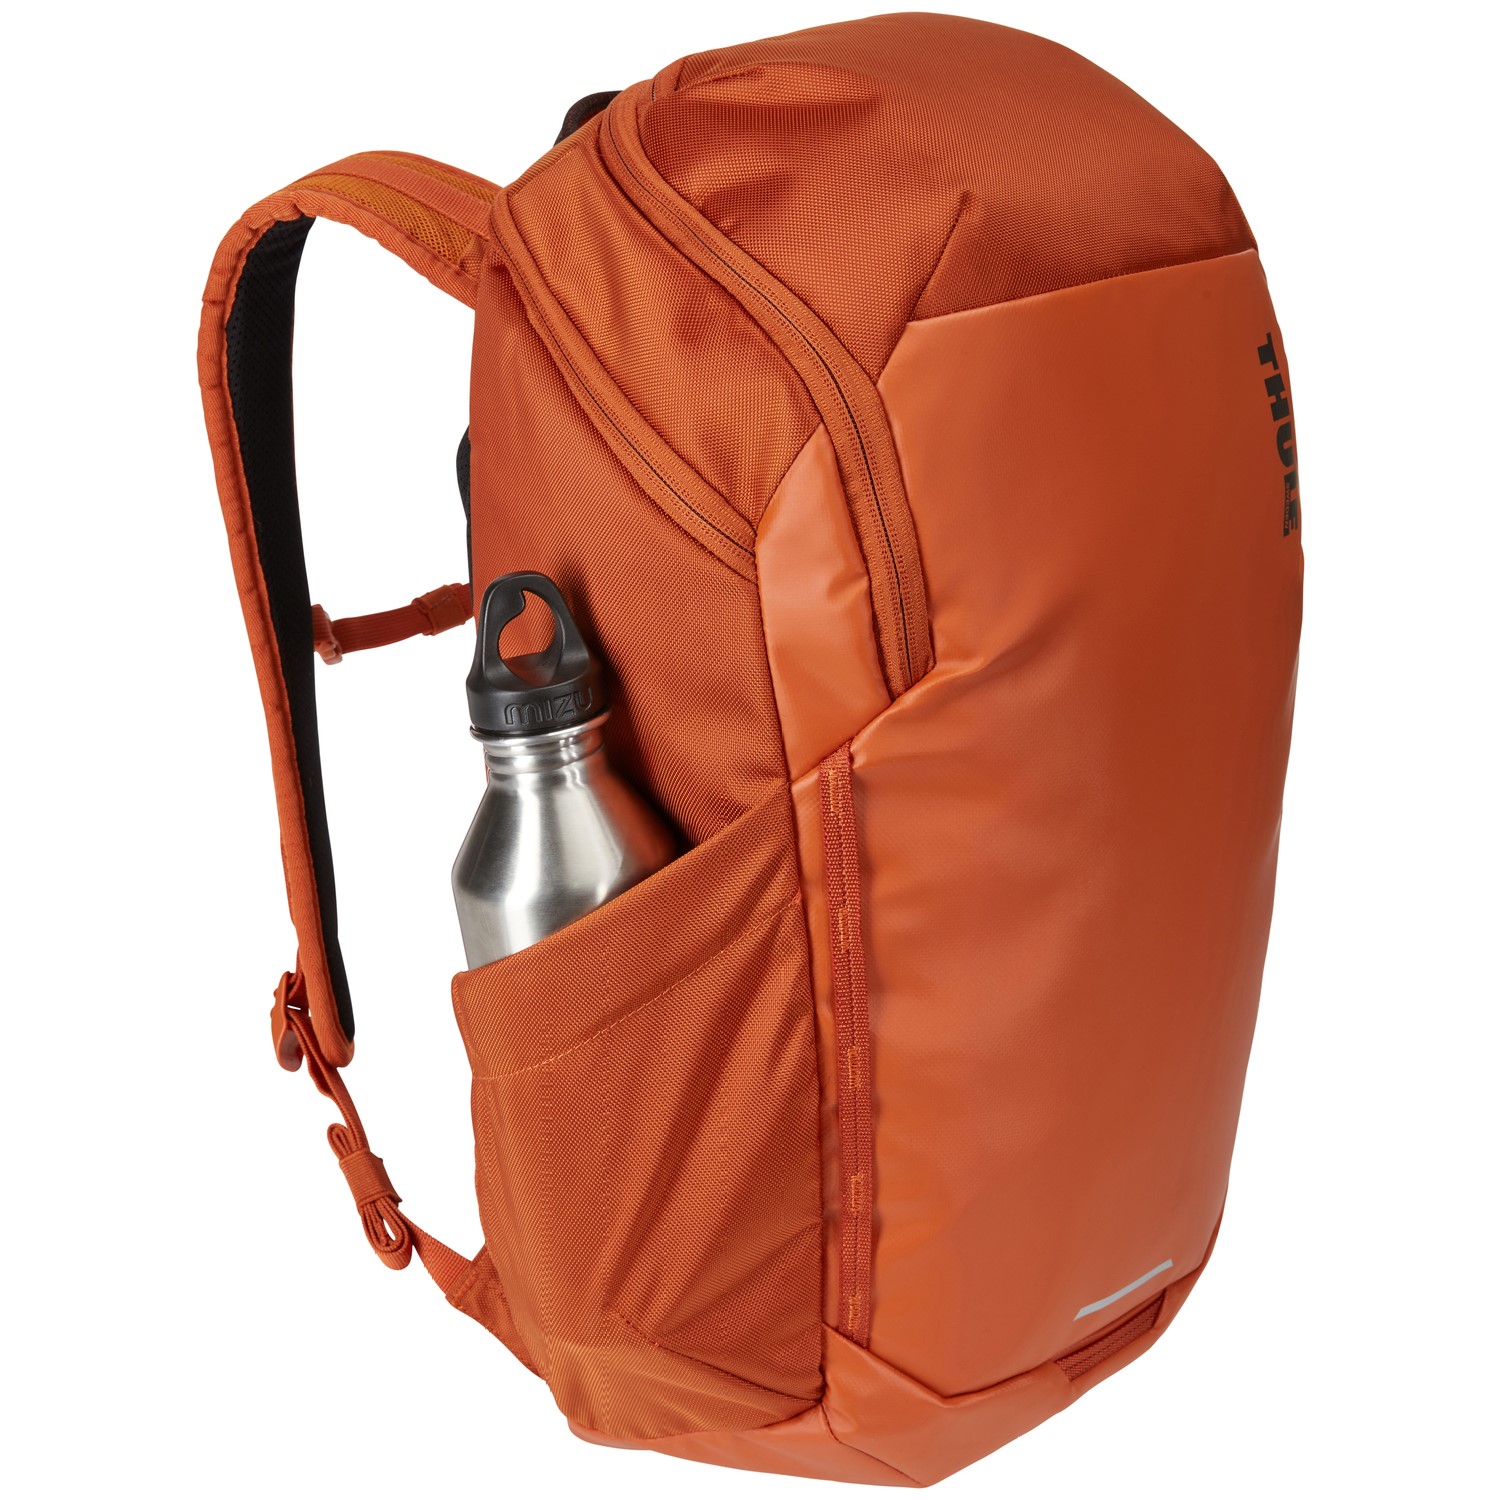 Stash a water bottle or other essentials in the expandable side pocket